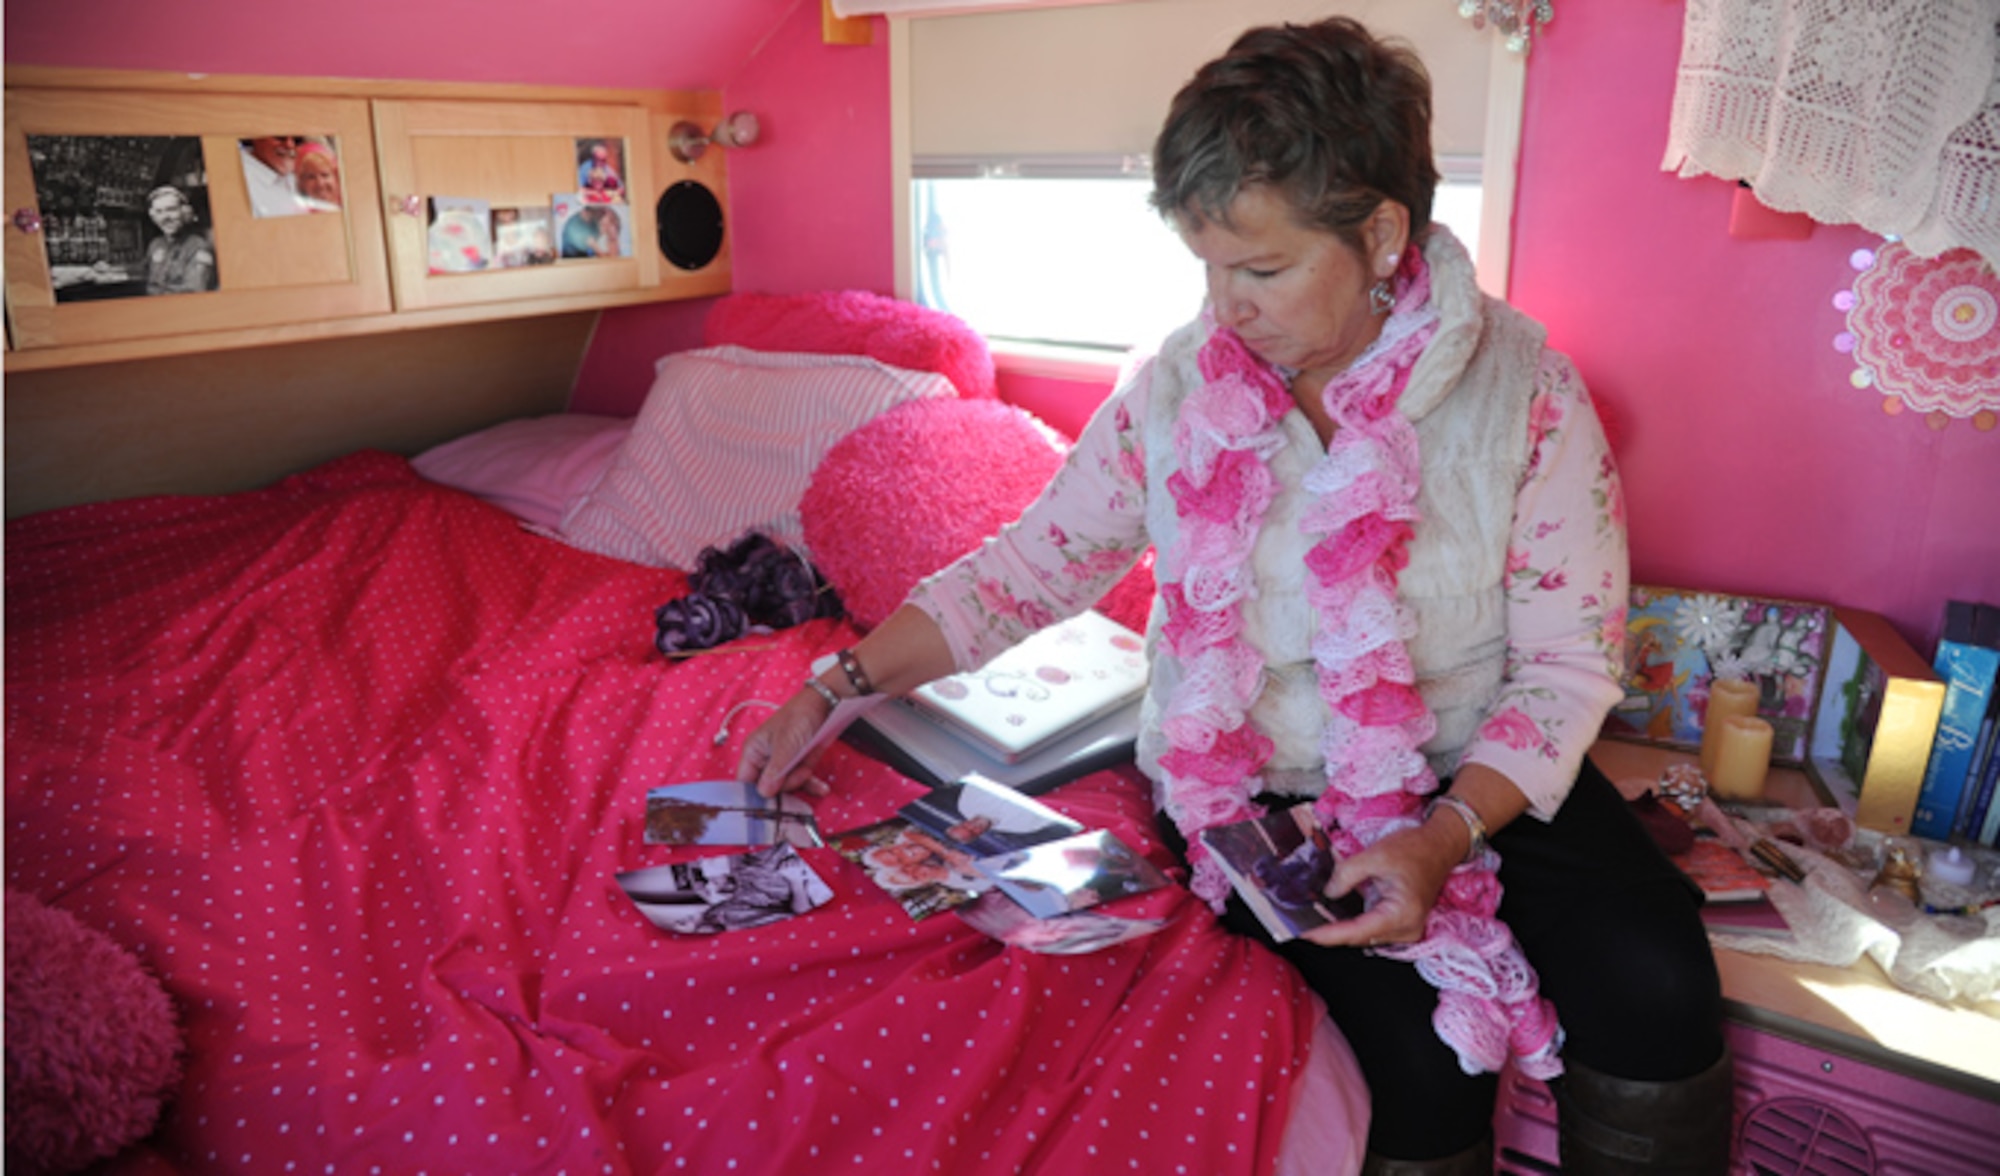 Alison Miller, widow of retired Master Sgt. Chuck Dearing, sorts through photos of herself and Dearing inside of her pink painted teardrop trailer during a travel break Jan. 16, 2014, at the Keesler Air Force Base camp site, Biloxi, Miss. Following Dearing’s retirement, the couple sold their home and belongings to travel the country for four years, staying primarily at base lodgings. Prior to the death of her husband, Miller told him that her intent was to continue traveling in a pink painted car so that he could find her while out on the road. (U.S. Air Force photo/Kemberly Groue)